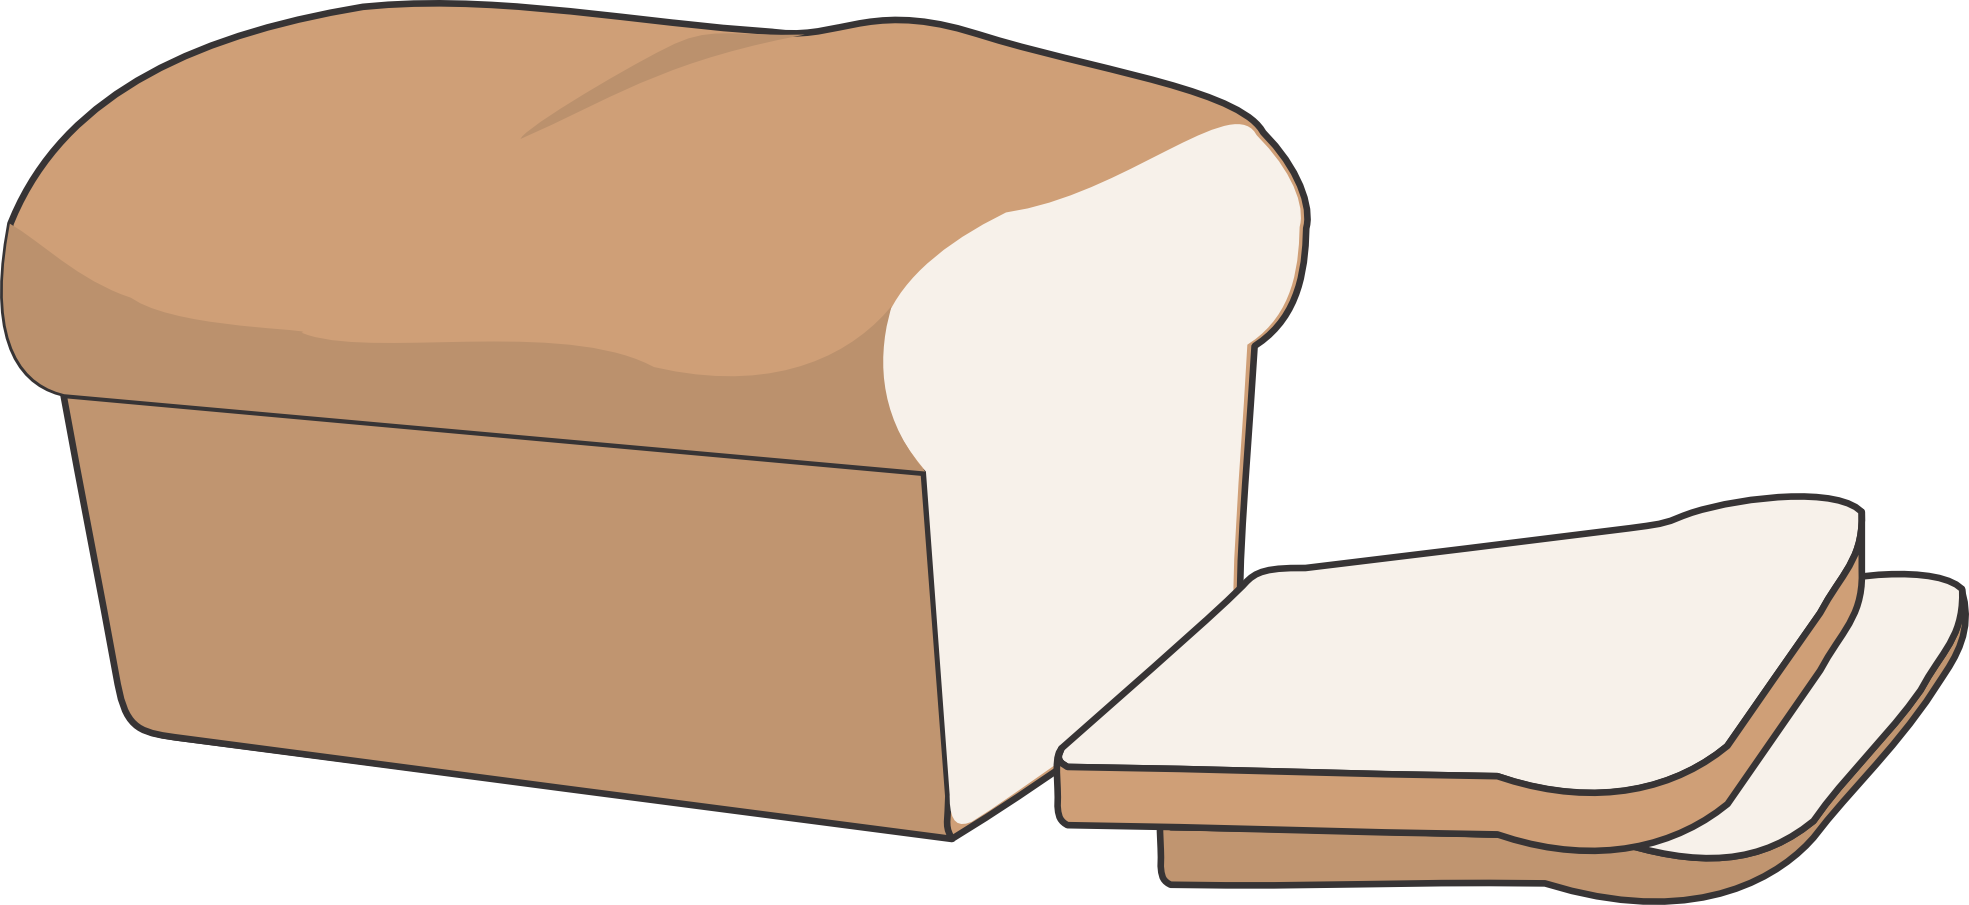 Bread Image Image Of A Cut Loaf Clipart